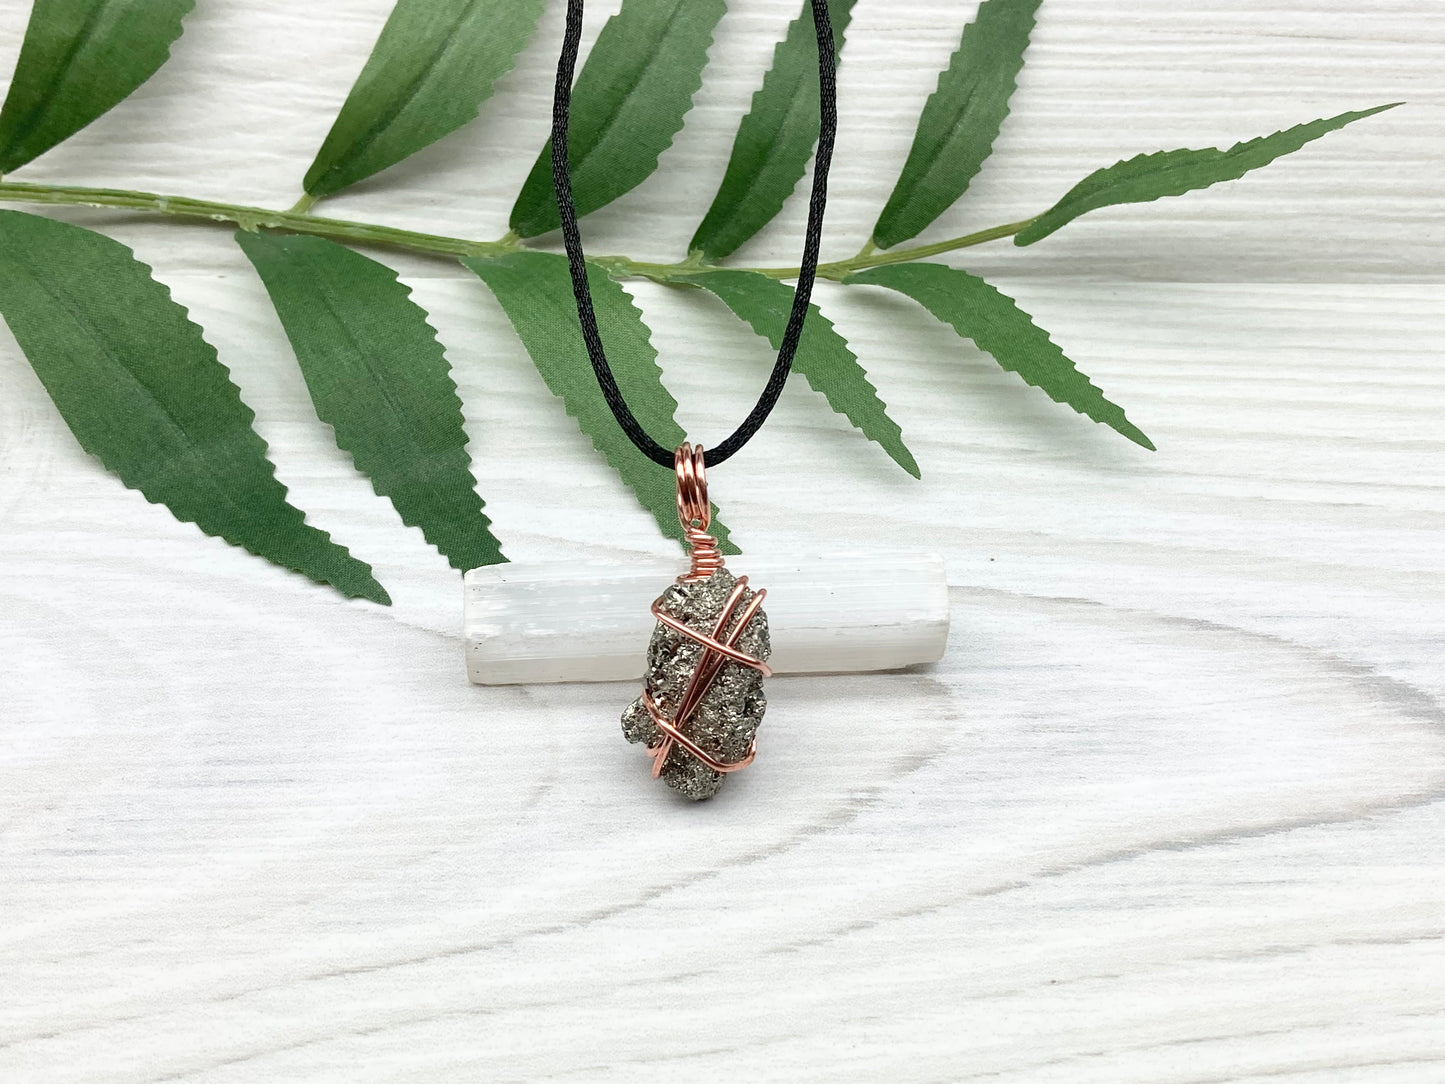 Raw Pyrite Necklace. Real Pyrite Stone Hand Wrapped With Copper Wire. Fools Gold Crystal Pendant. Comes On A Black Chain. Leo And Taurus Zodiac Jewelry. Handmade In Tennessee.